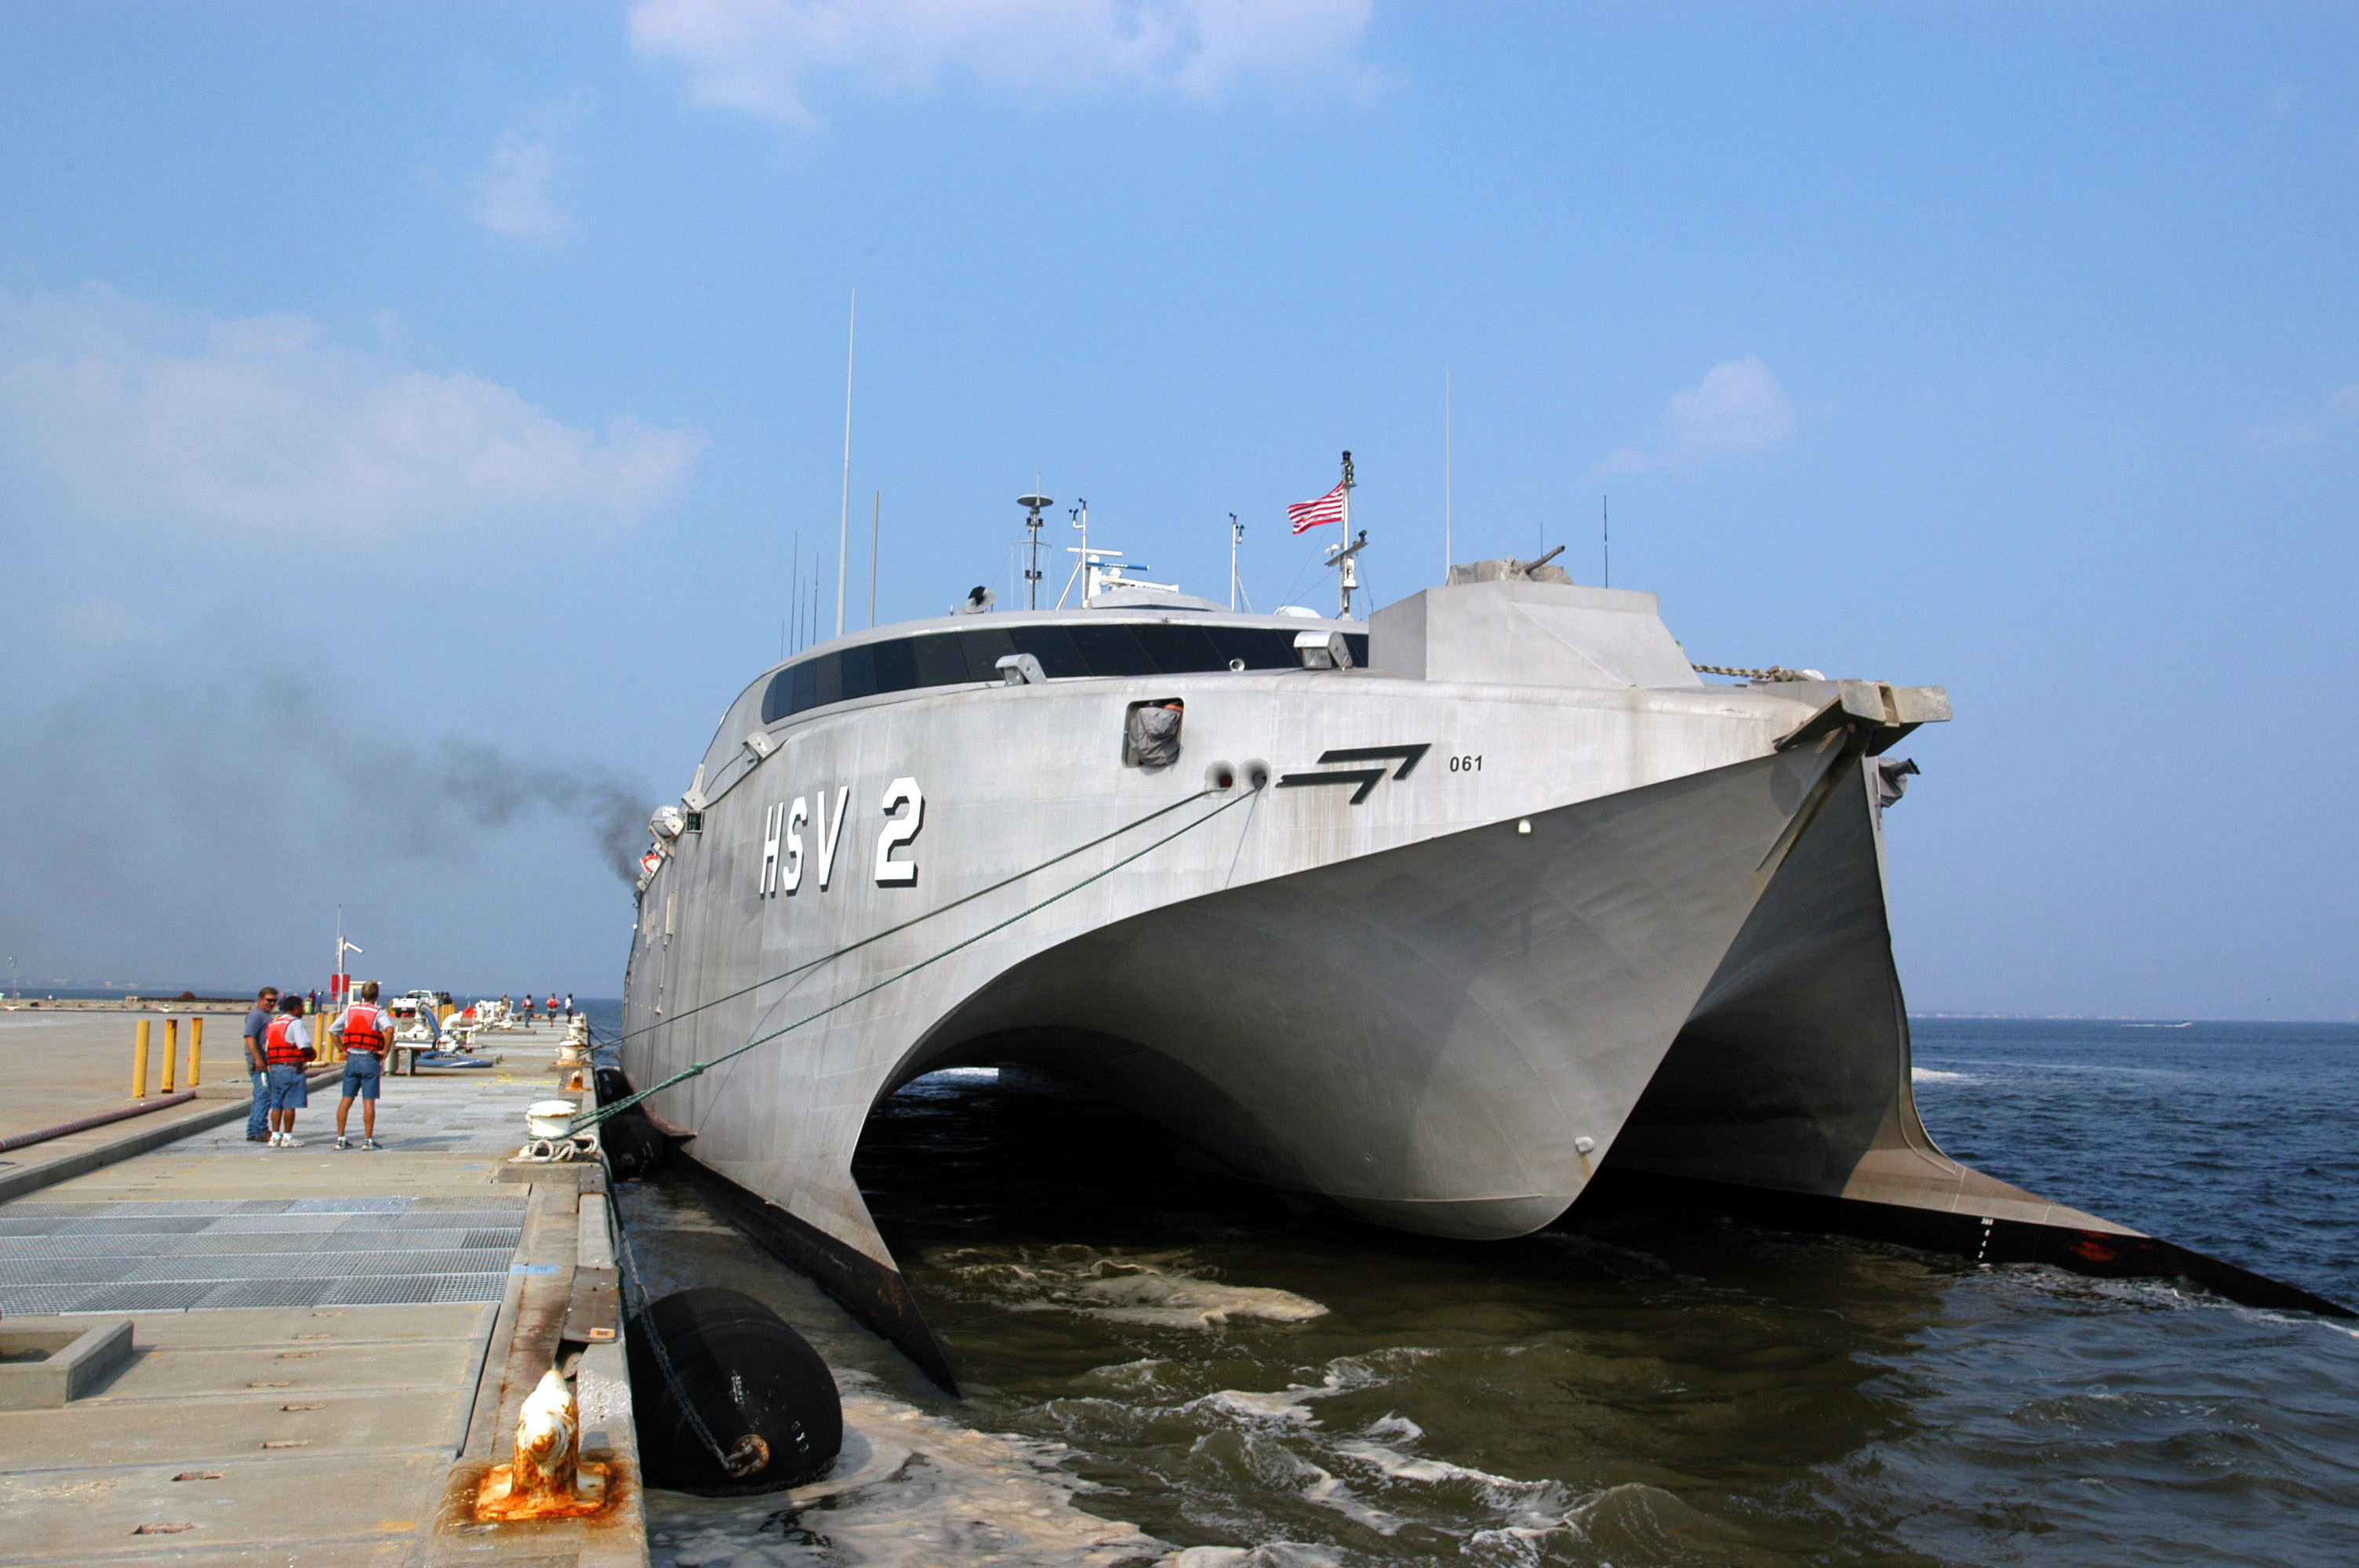 US_Navy_050903-N-5329B-003_The_U.S._Navy_High_Speed_Vessel_(HSV-2)_Swift,_loaded_with_more_than_85_pallets_of_water,_hygiene_kits,_and_food,_arrives_on_board_Naval_Air_Station_Pensacola,_Fla.jpg